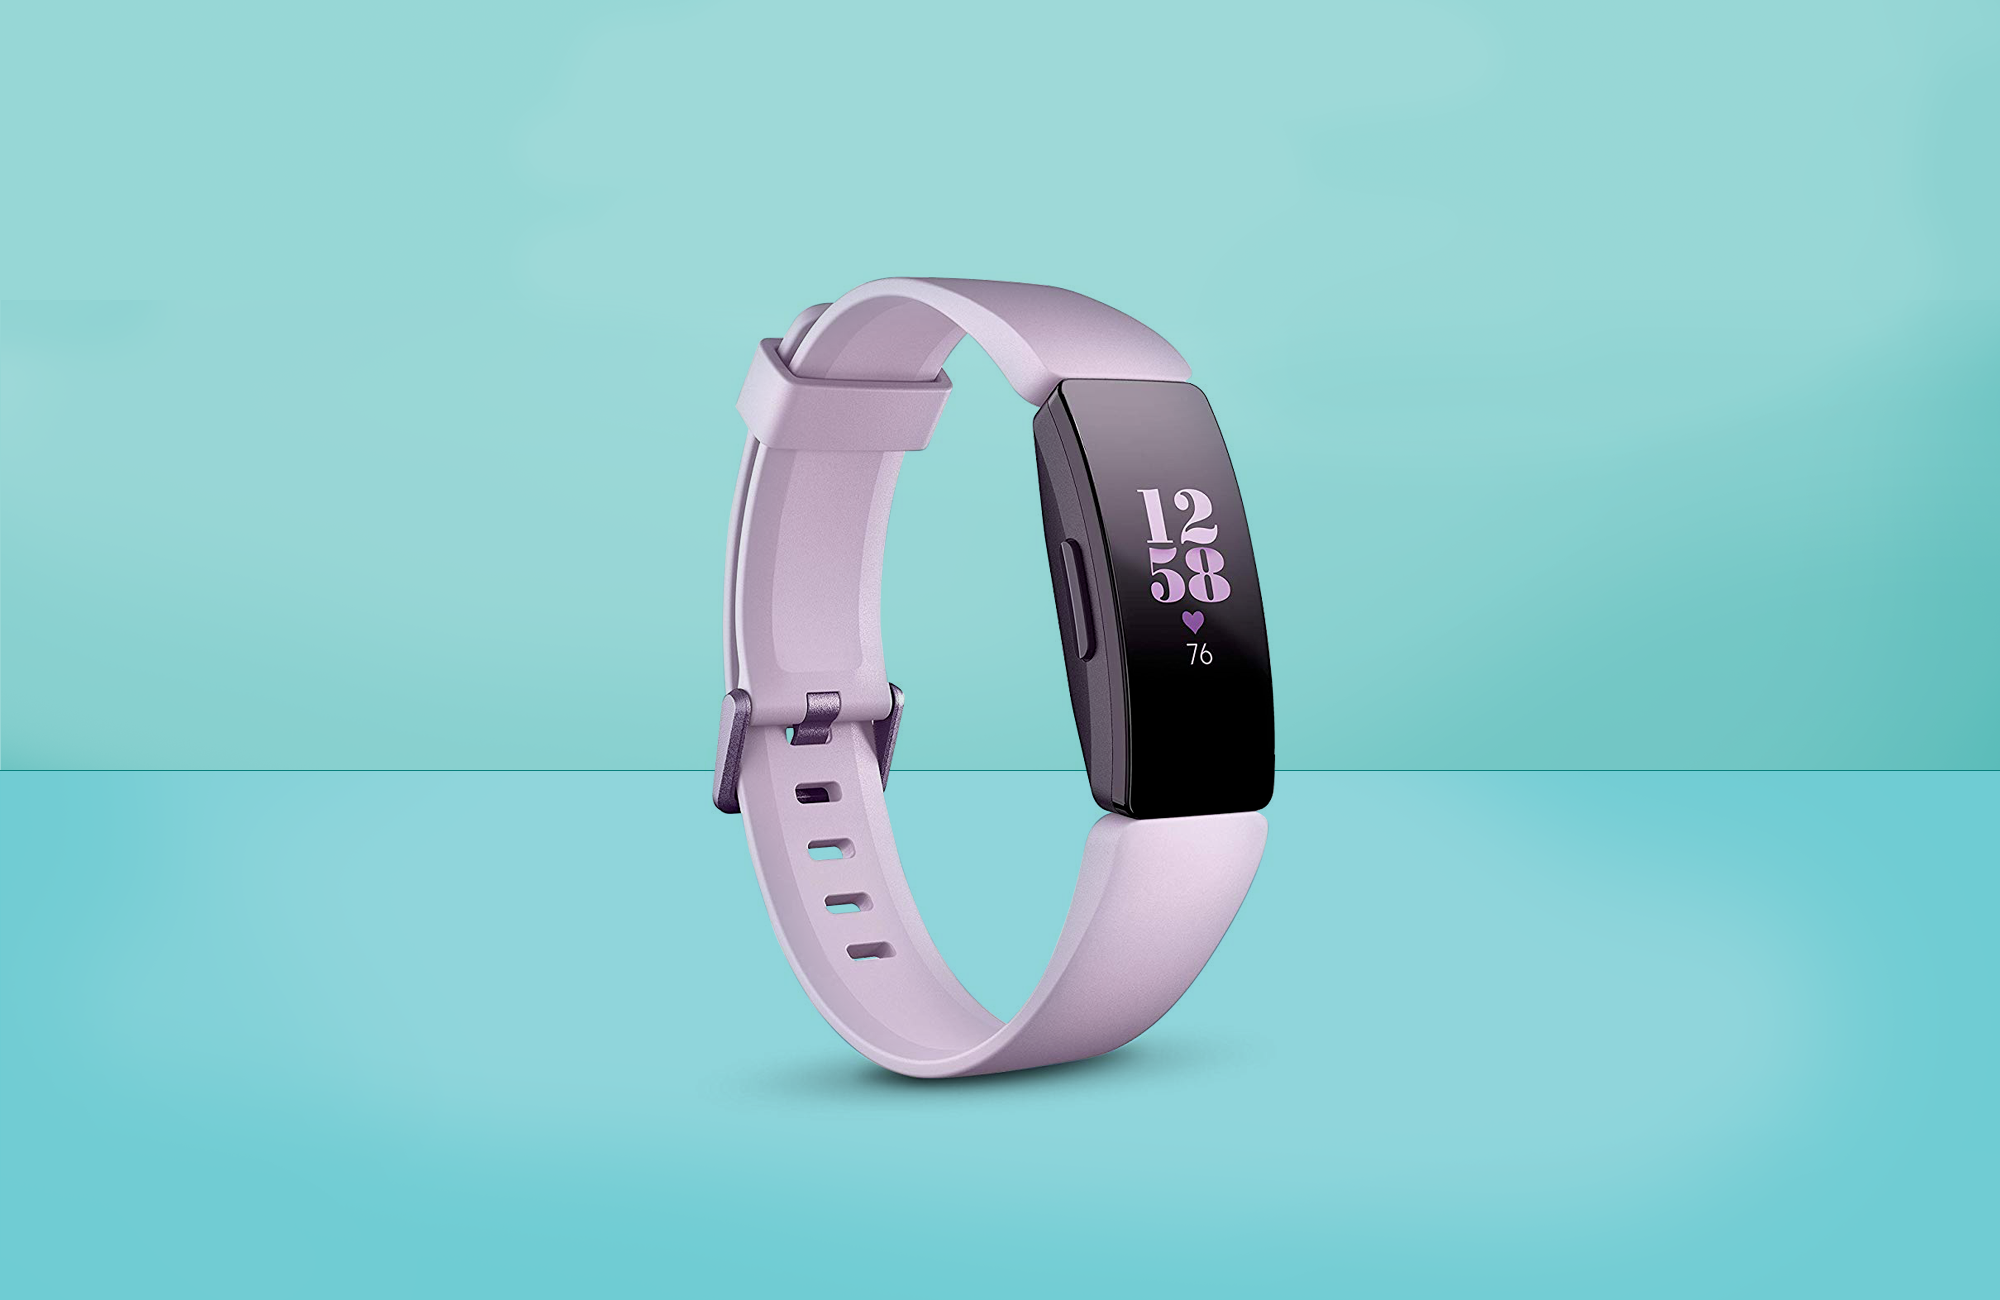 different fitbits